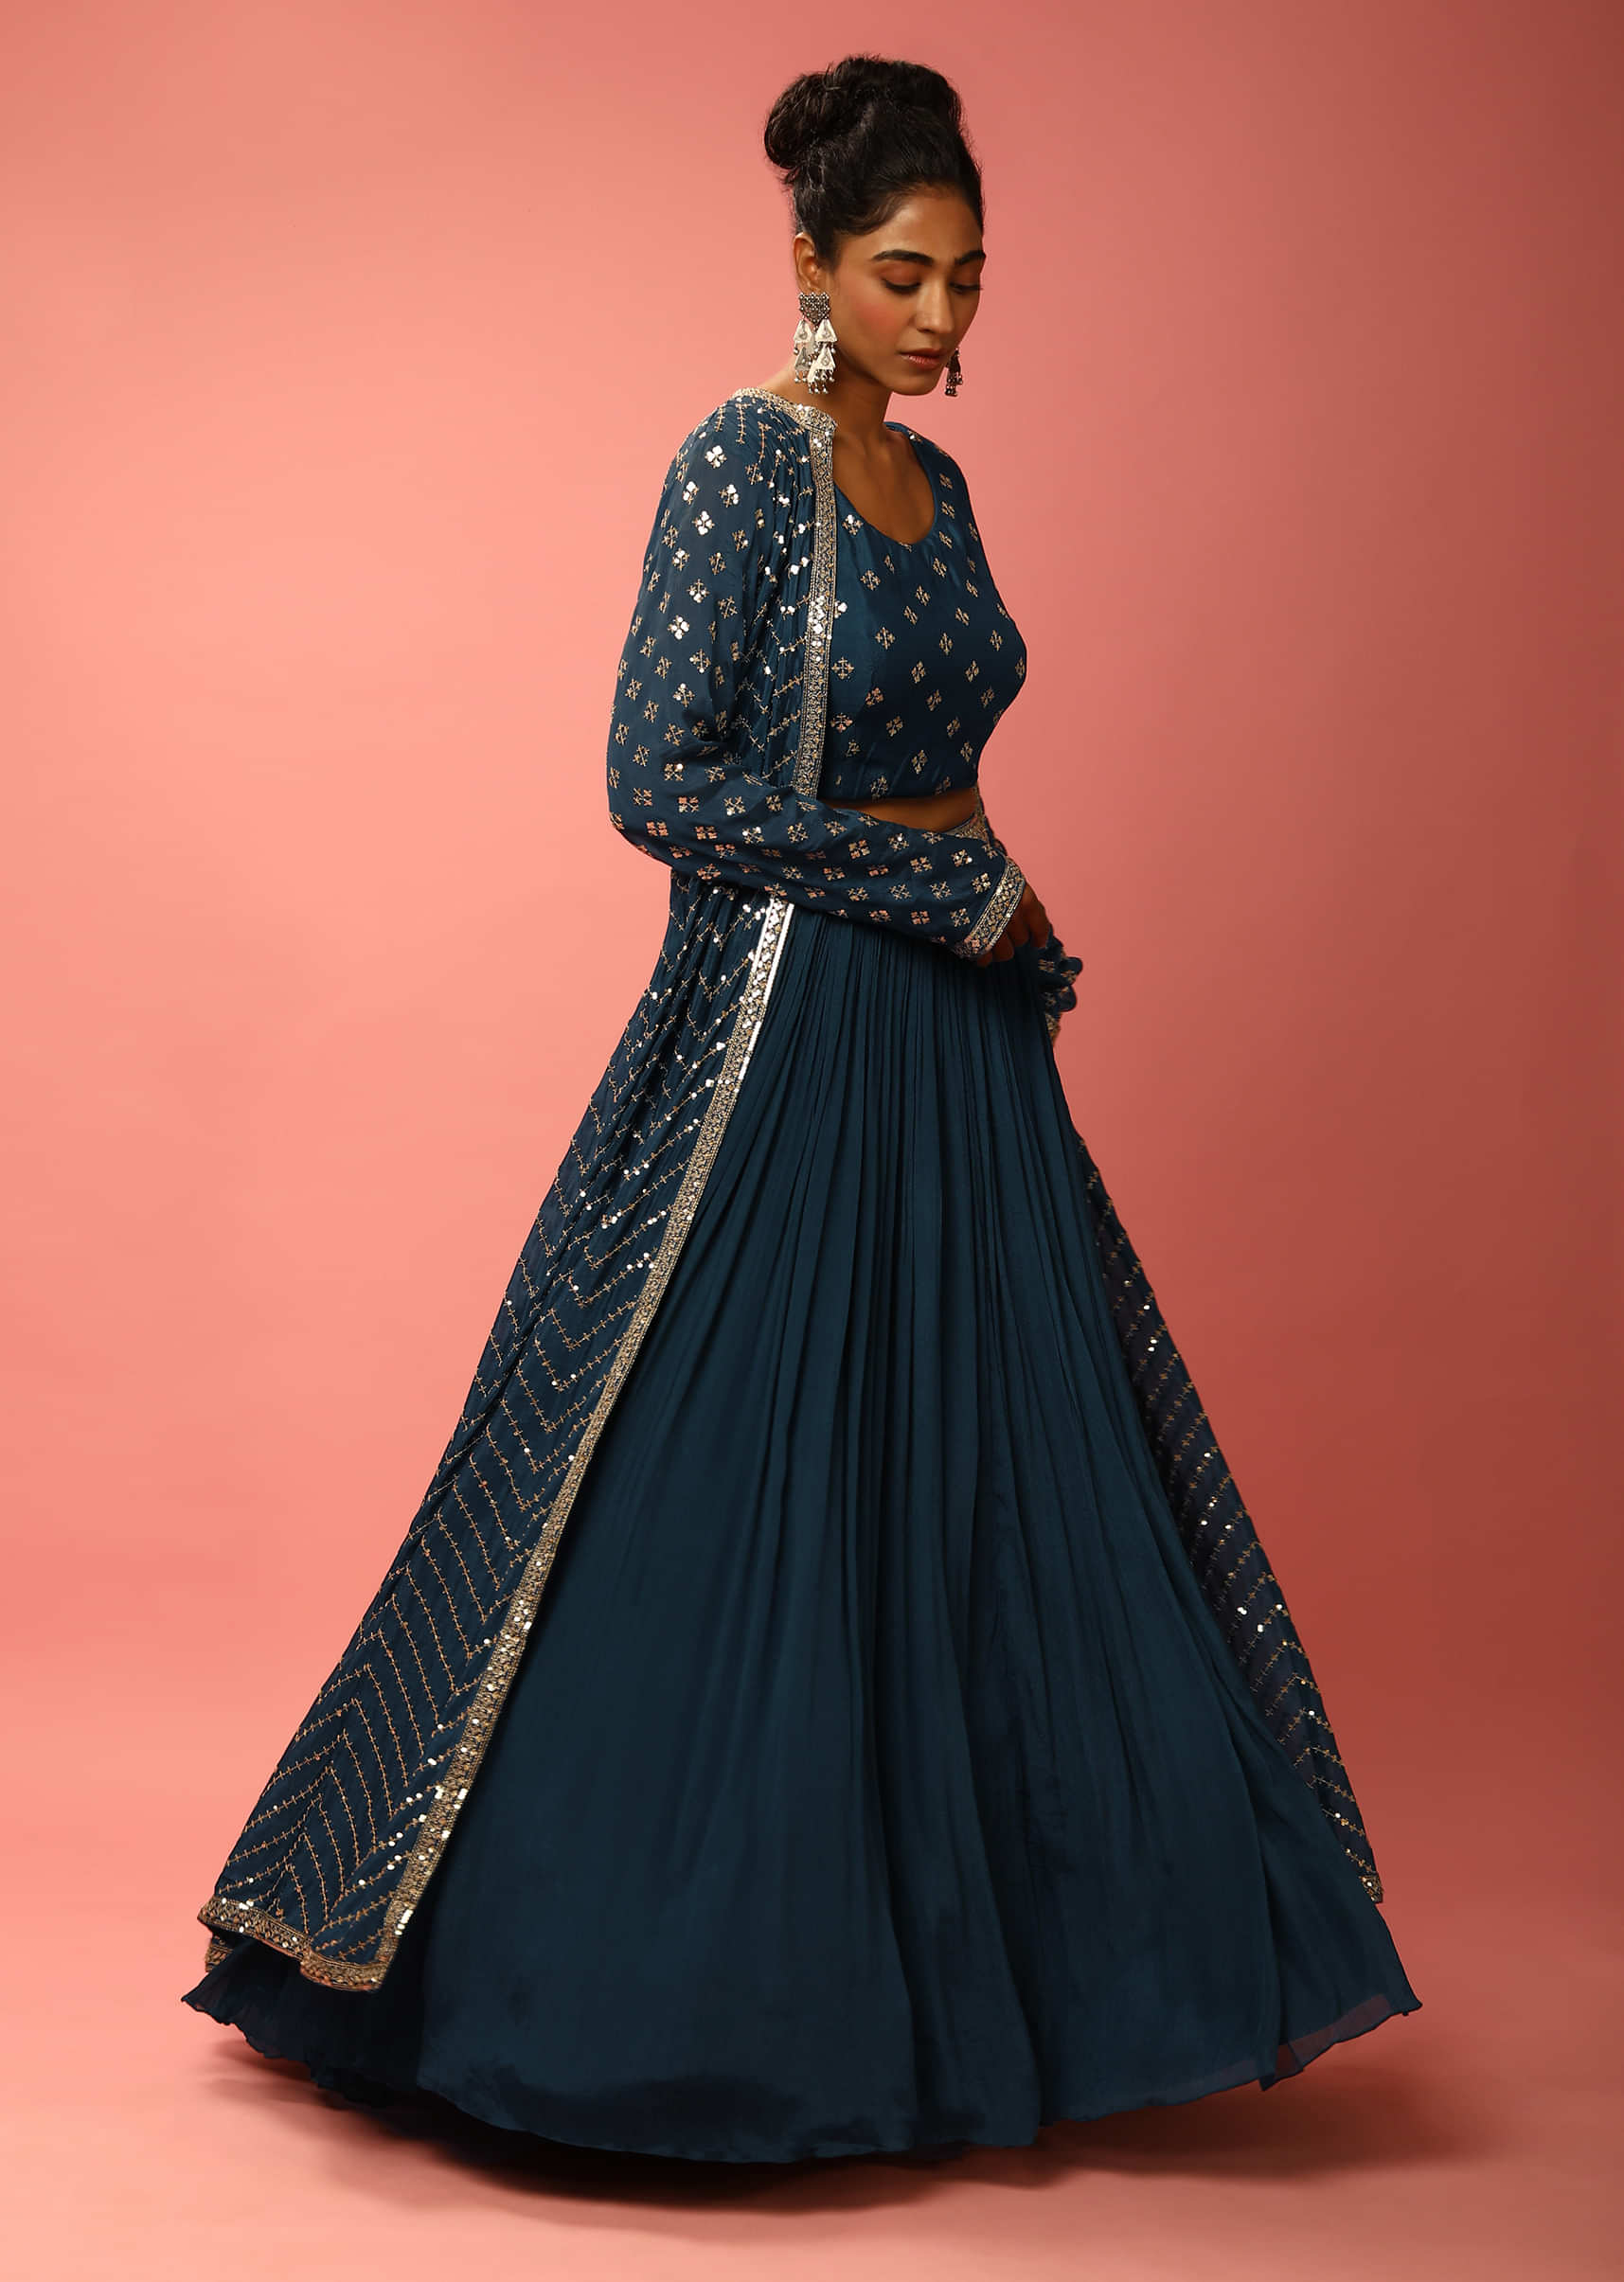 Moroccan Blue Lehenga In Chiffon With Sequin Embroidered Crop Top And Long Jacket 